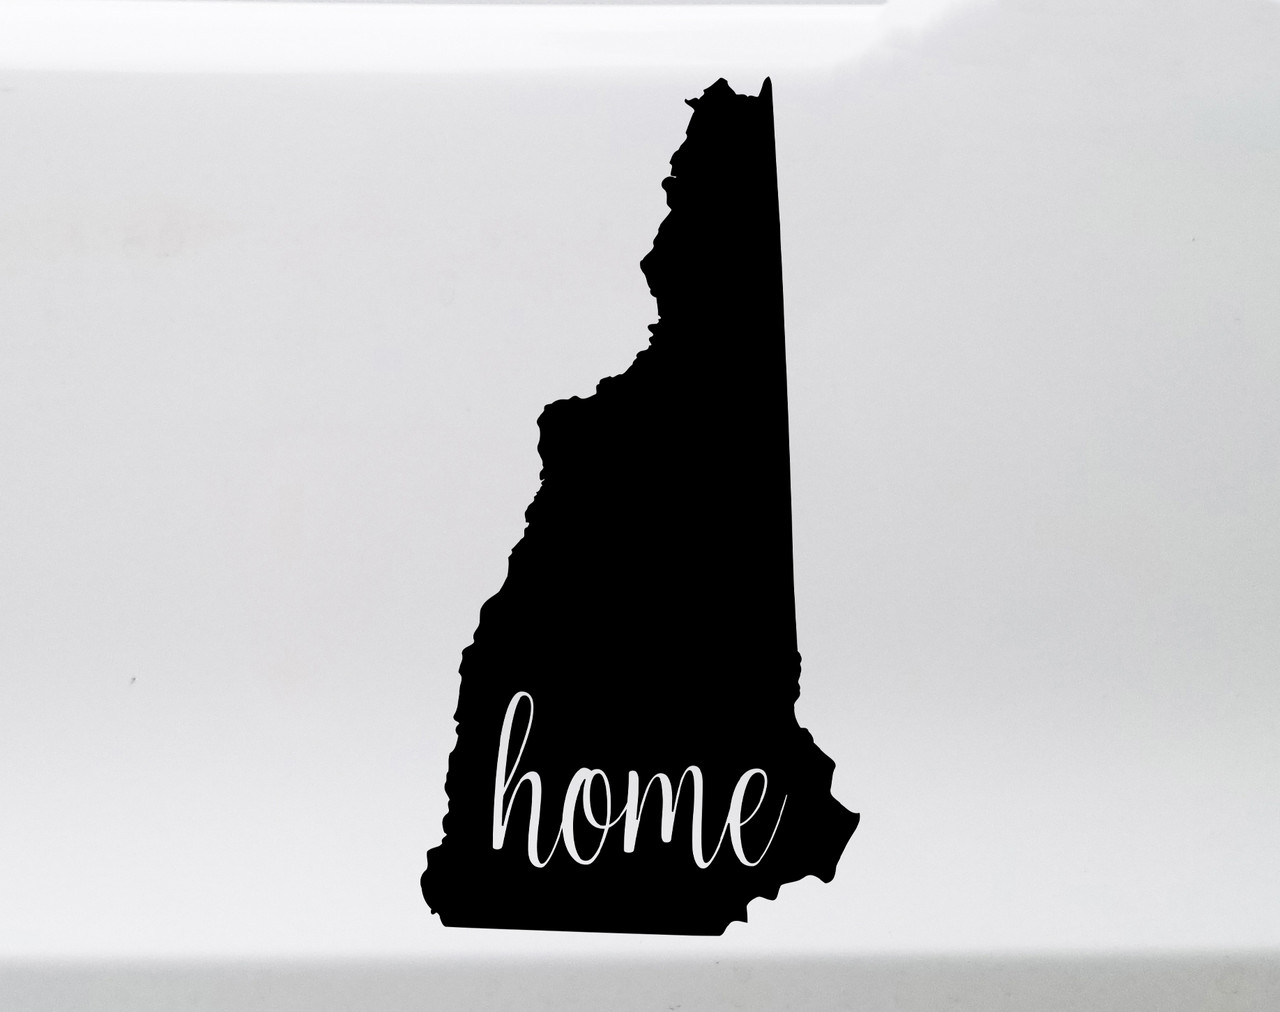 New Hampshire Home State Vinyl Decal - Native Outline - Die Cut Sticker